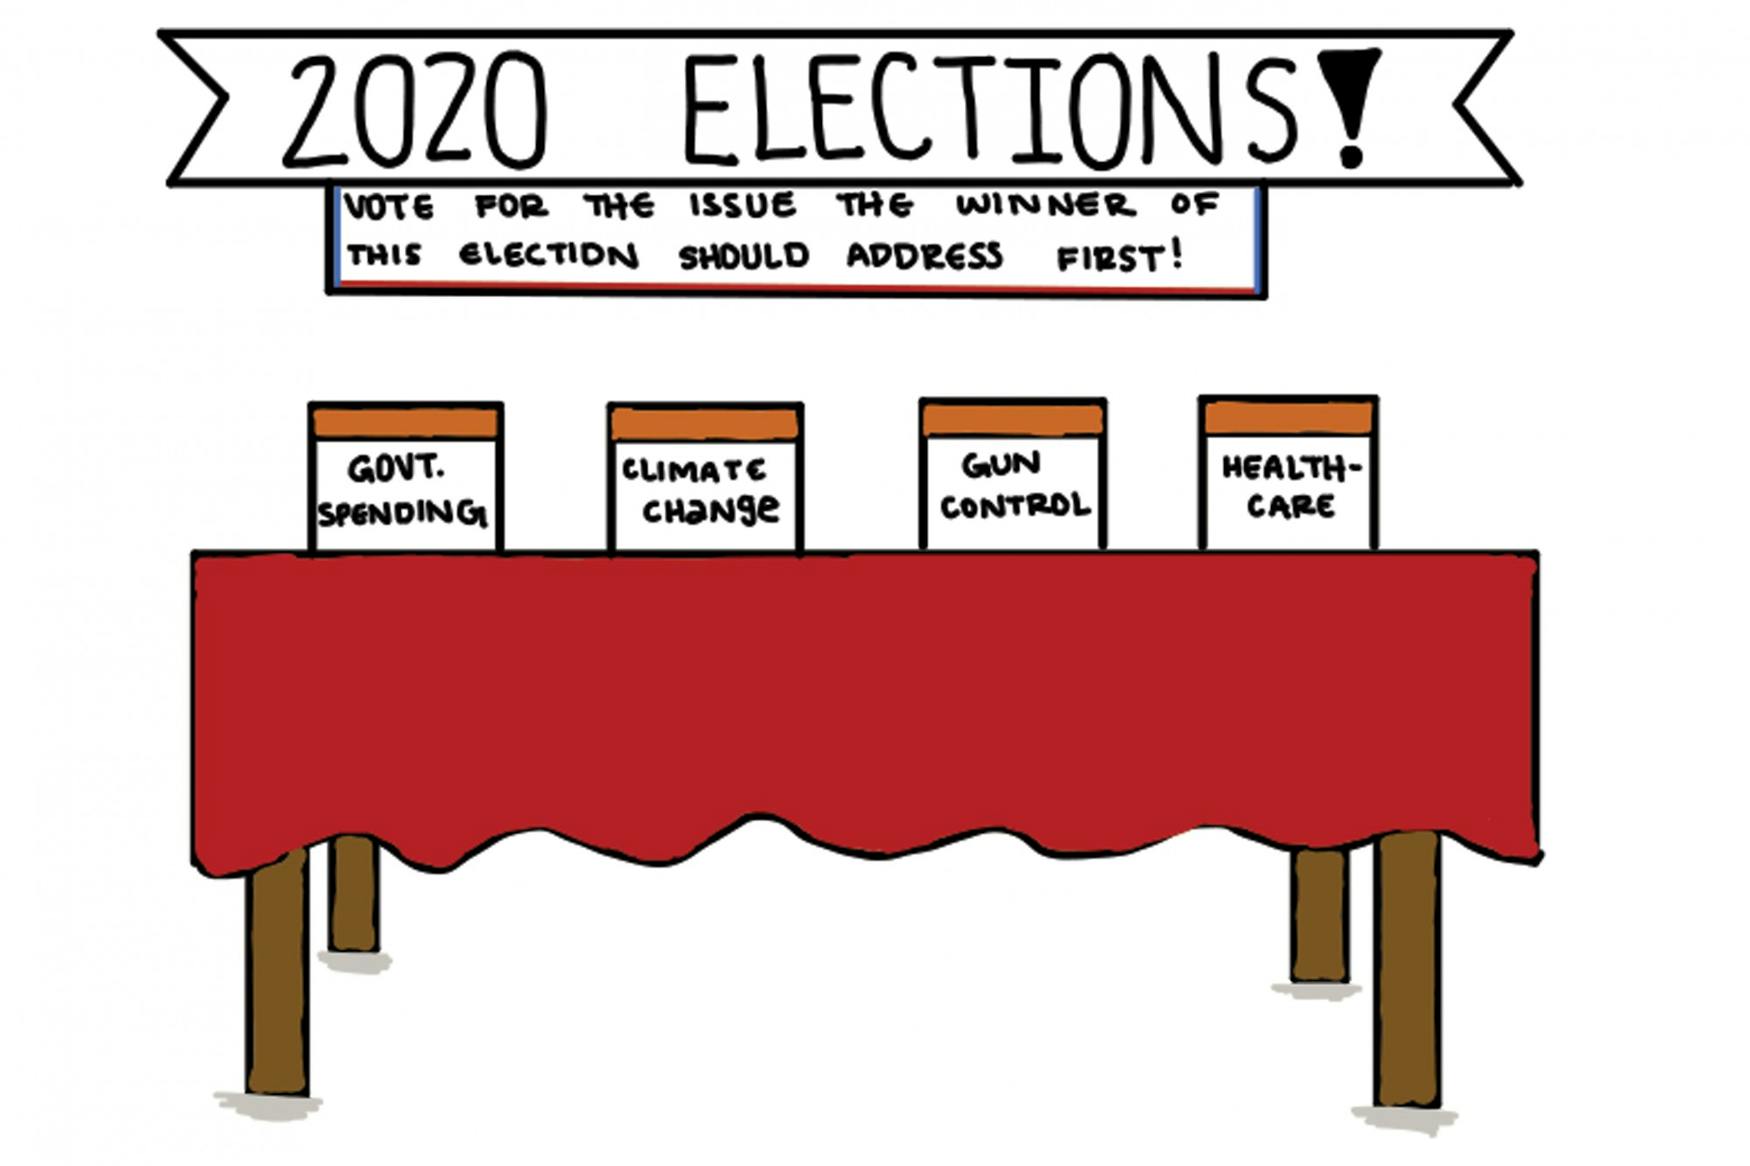 2020 Elections!